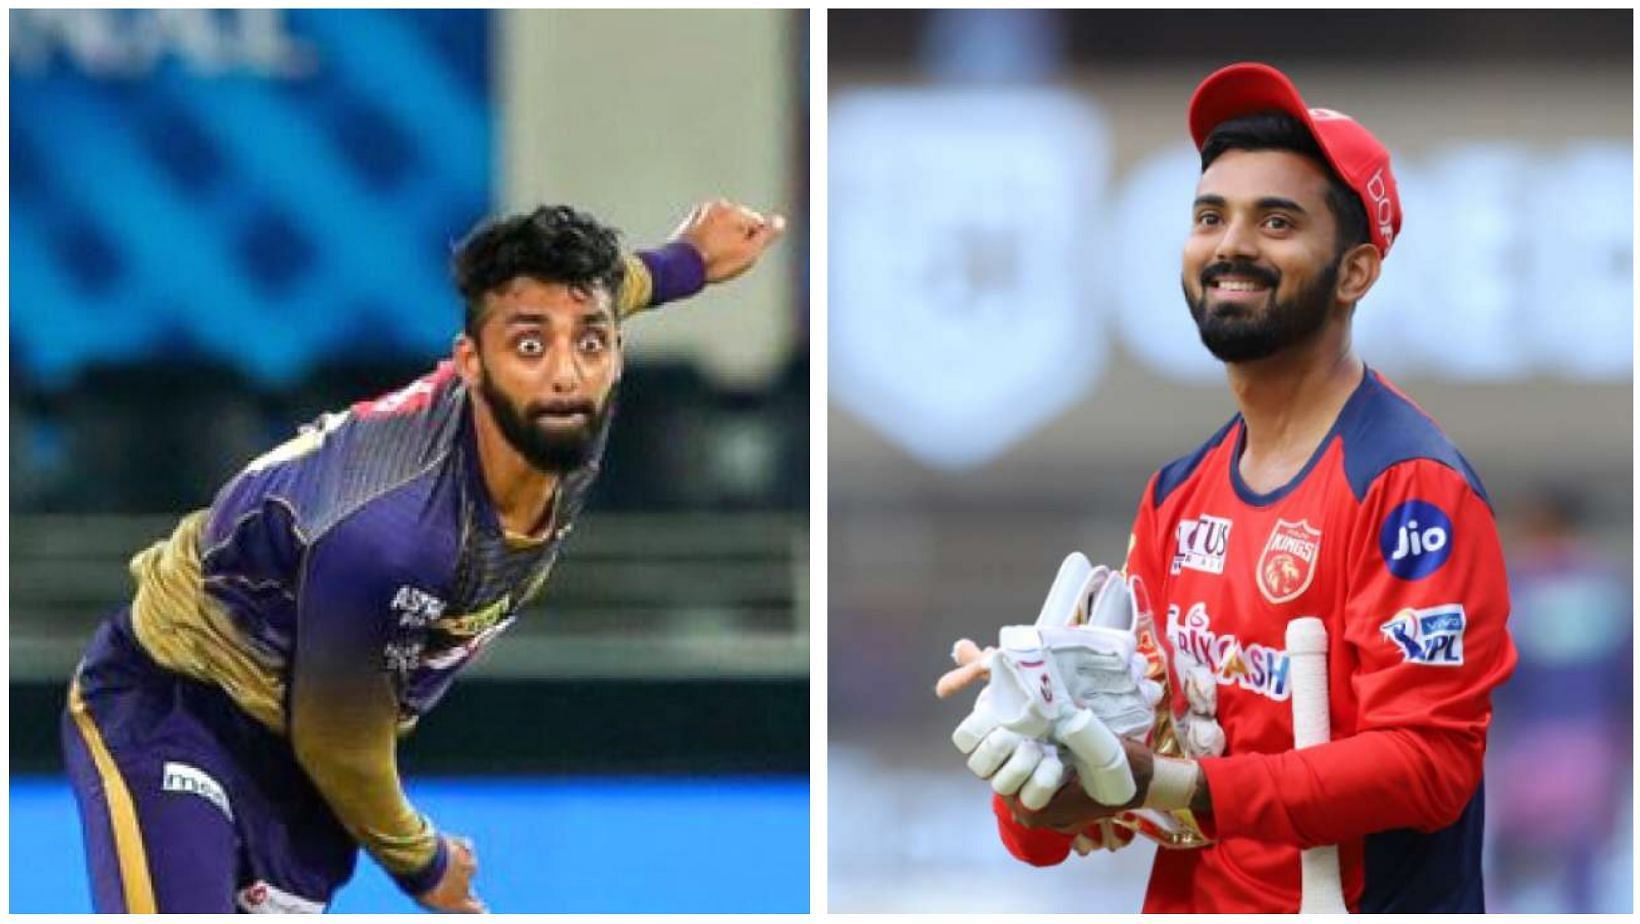 KL Rahul and Varun CV have a big series ahead of them when India play New Zealand.